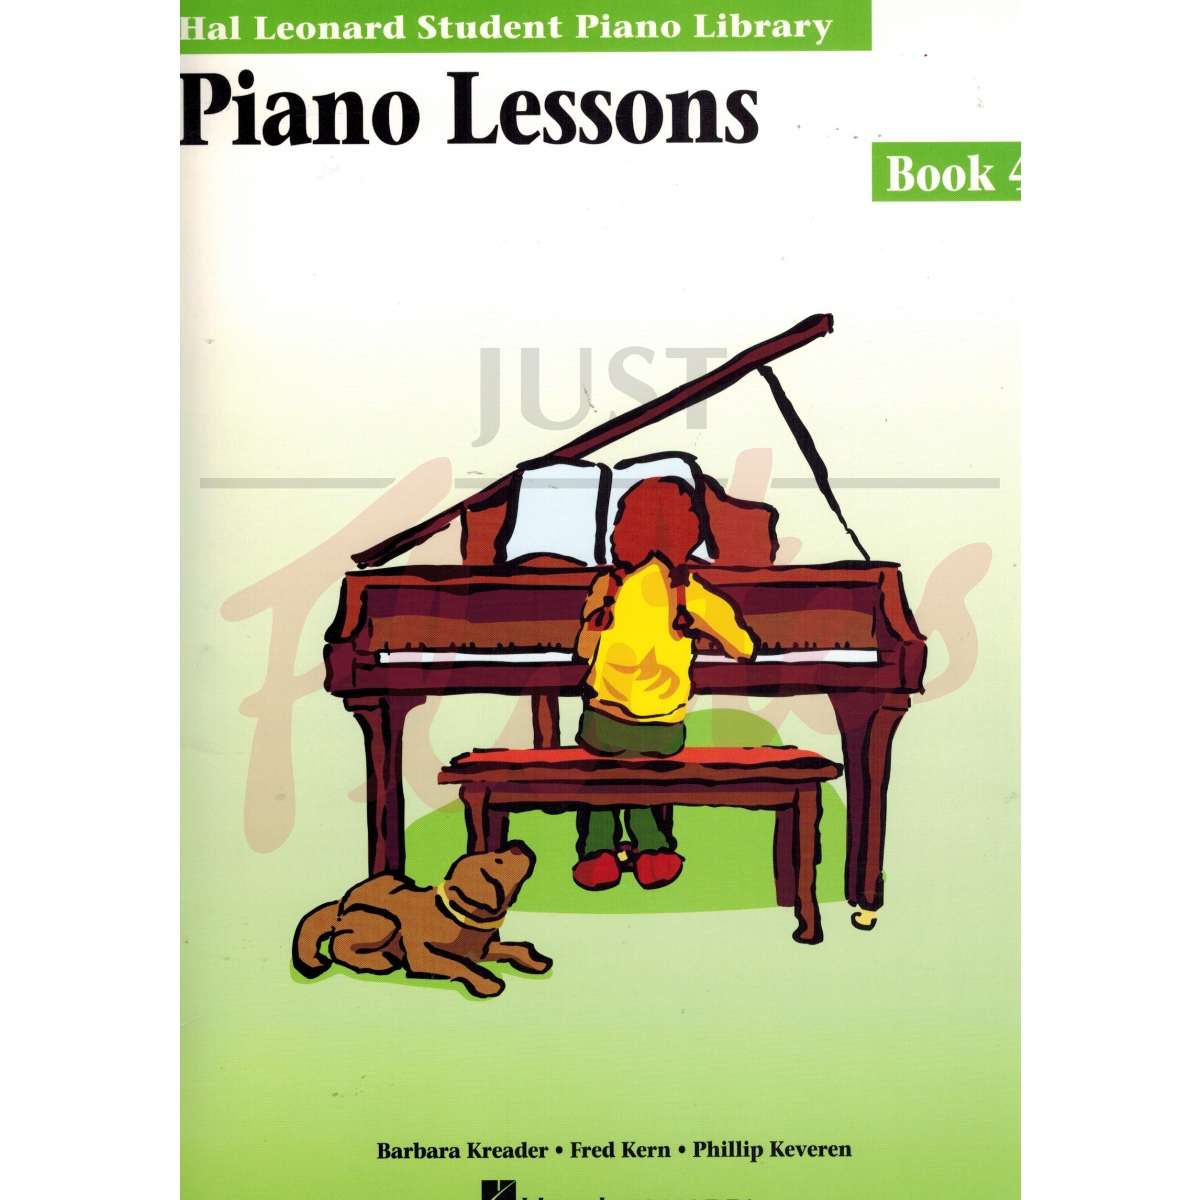 Student Piano Library: Piano Lessons Book 4